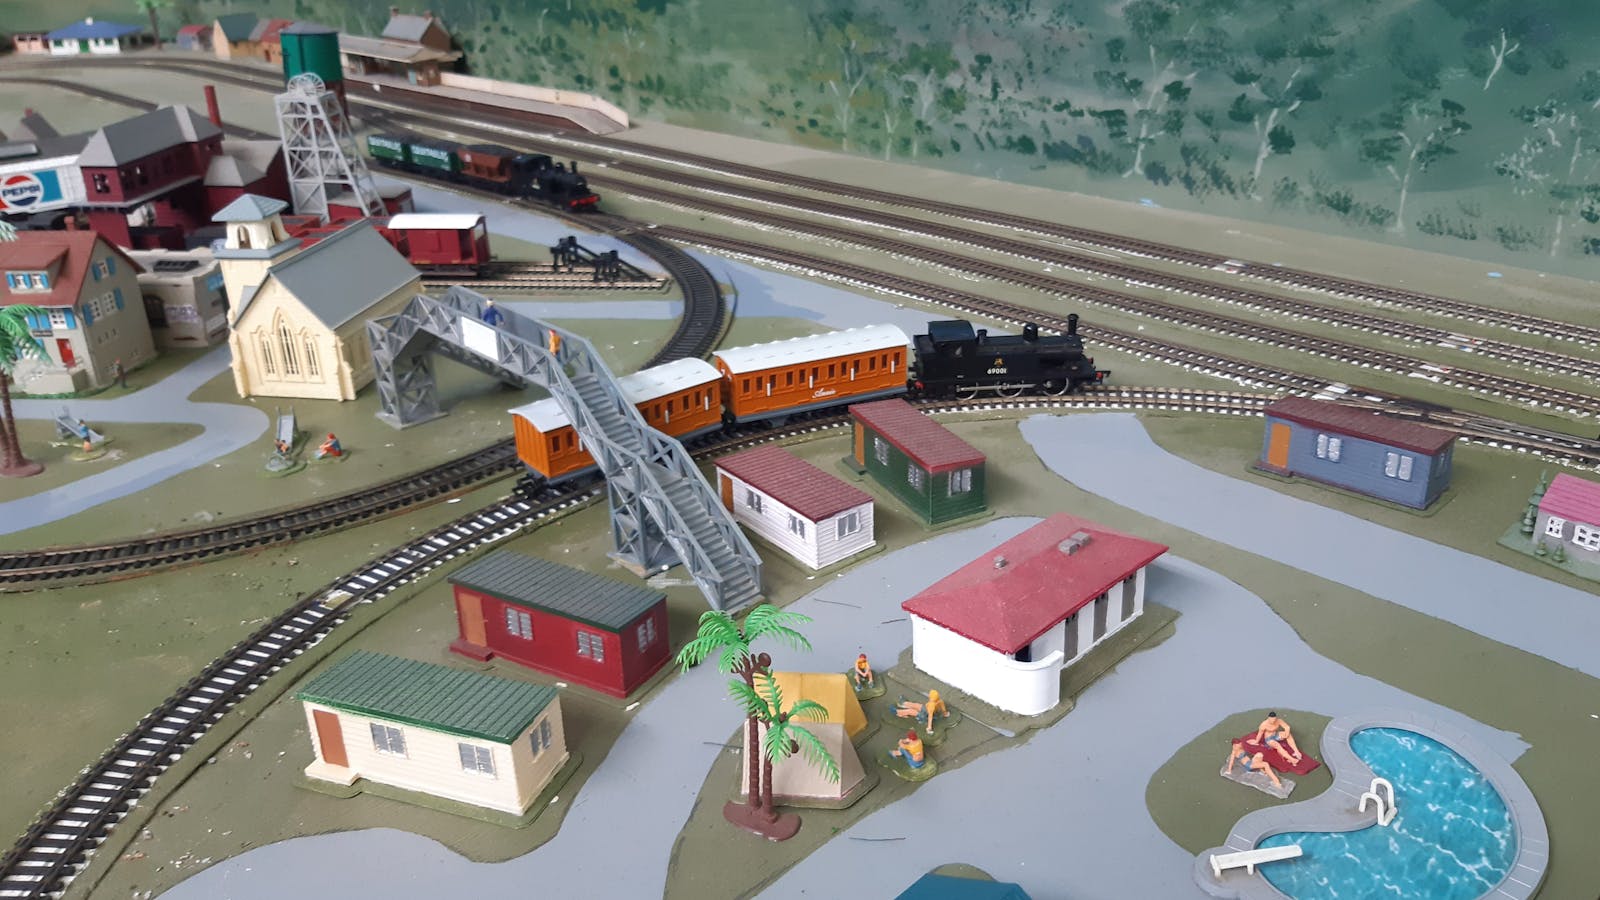 A small section of the Model Railway